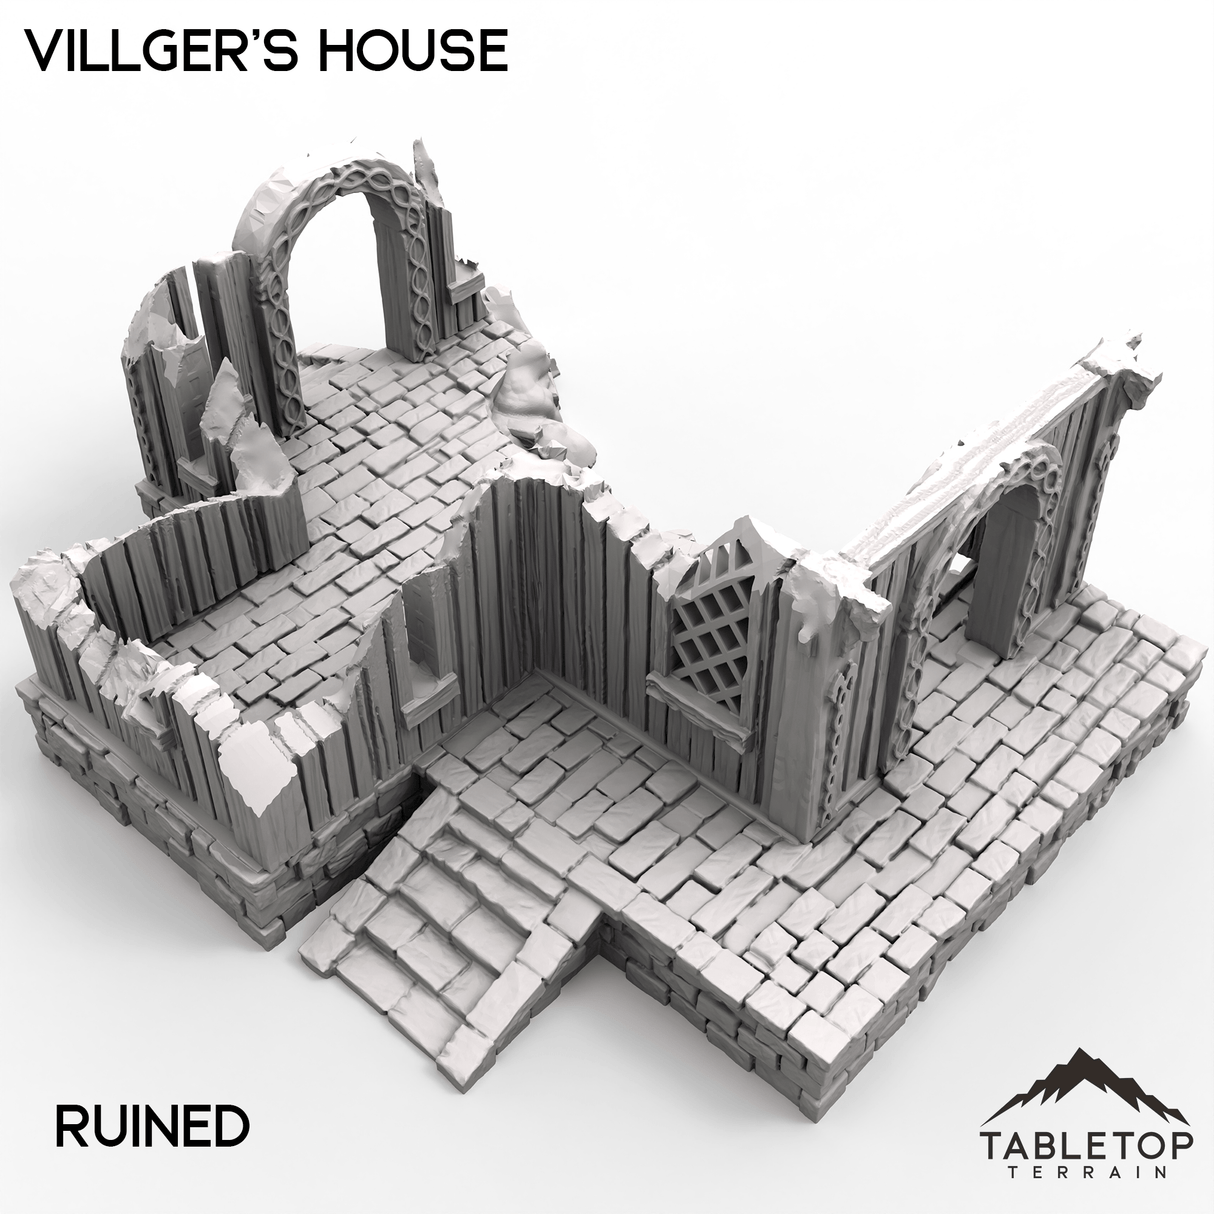 Tabletop Terrain Building 32mm / Ruined Villager's House - Kingdom of Saxonia